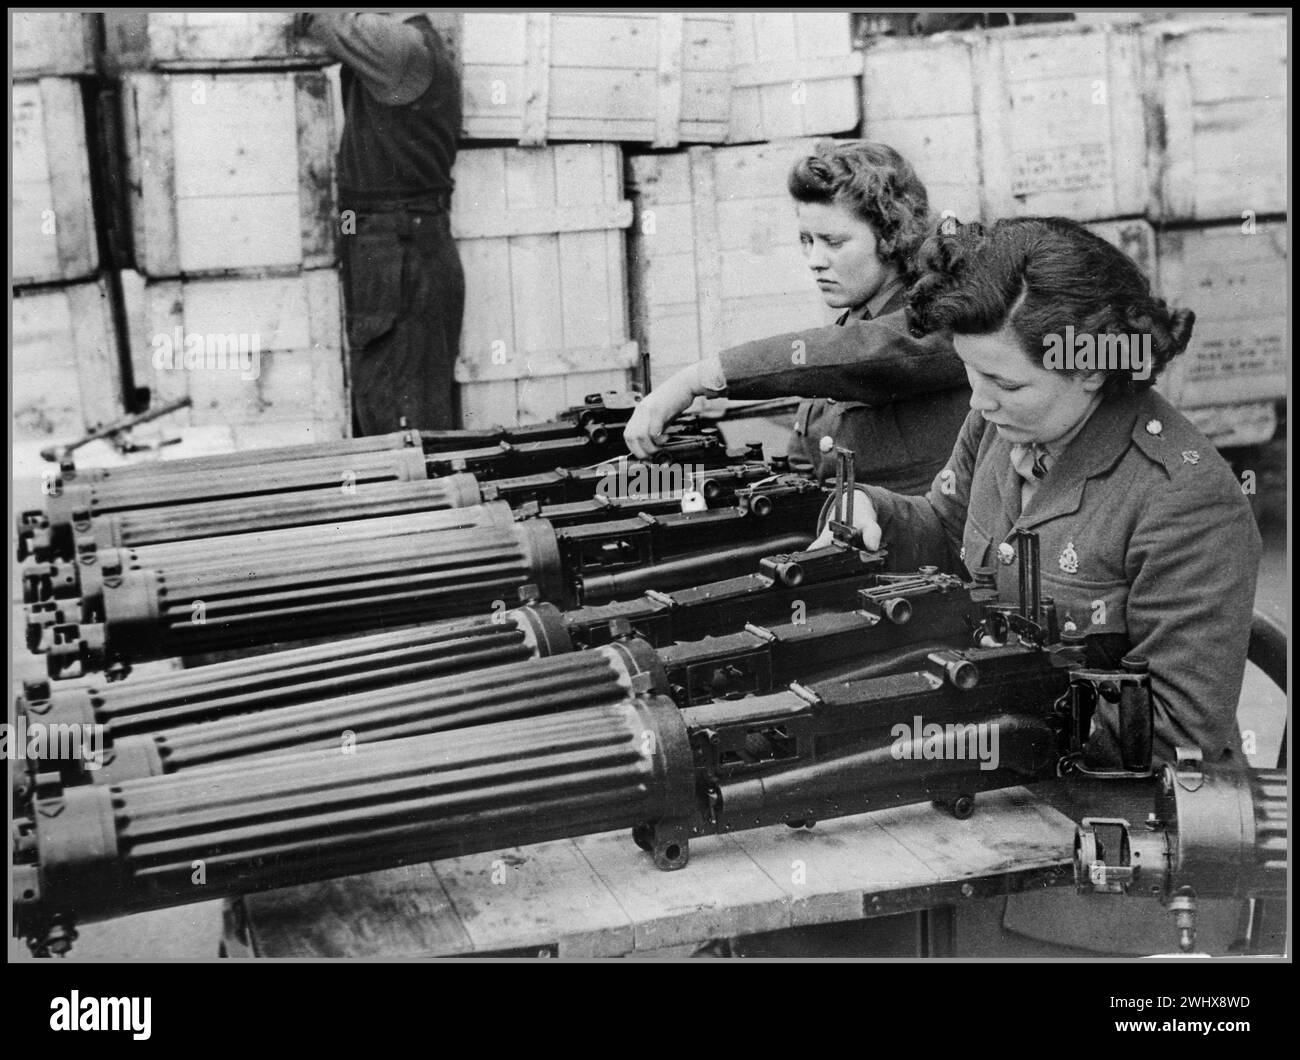 WW2 UK War Work Water-cooled .303 Vickers machine guns just arrived from Vickers Ltd. are checked at an ordnance depot in England by women of the ATS World War II Second World War Date circa 1941 Stock Photo